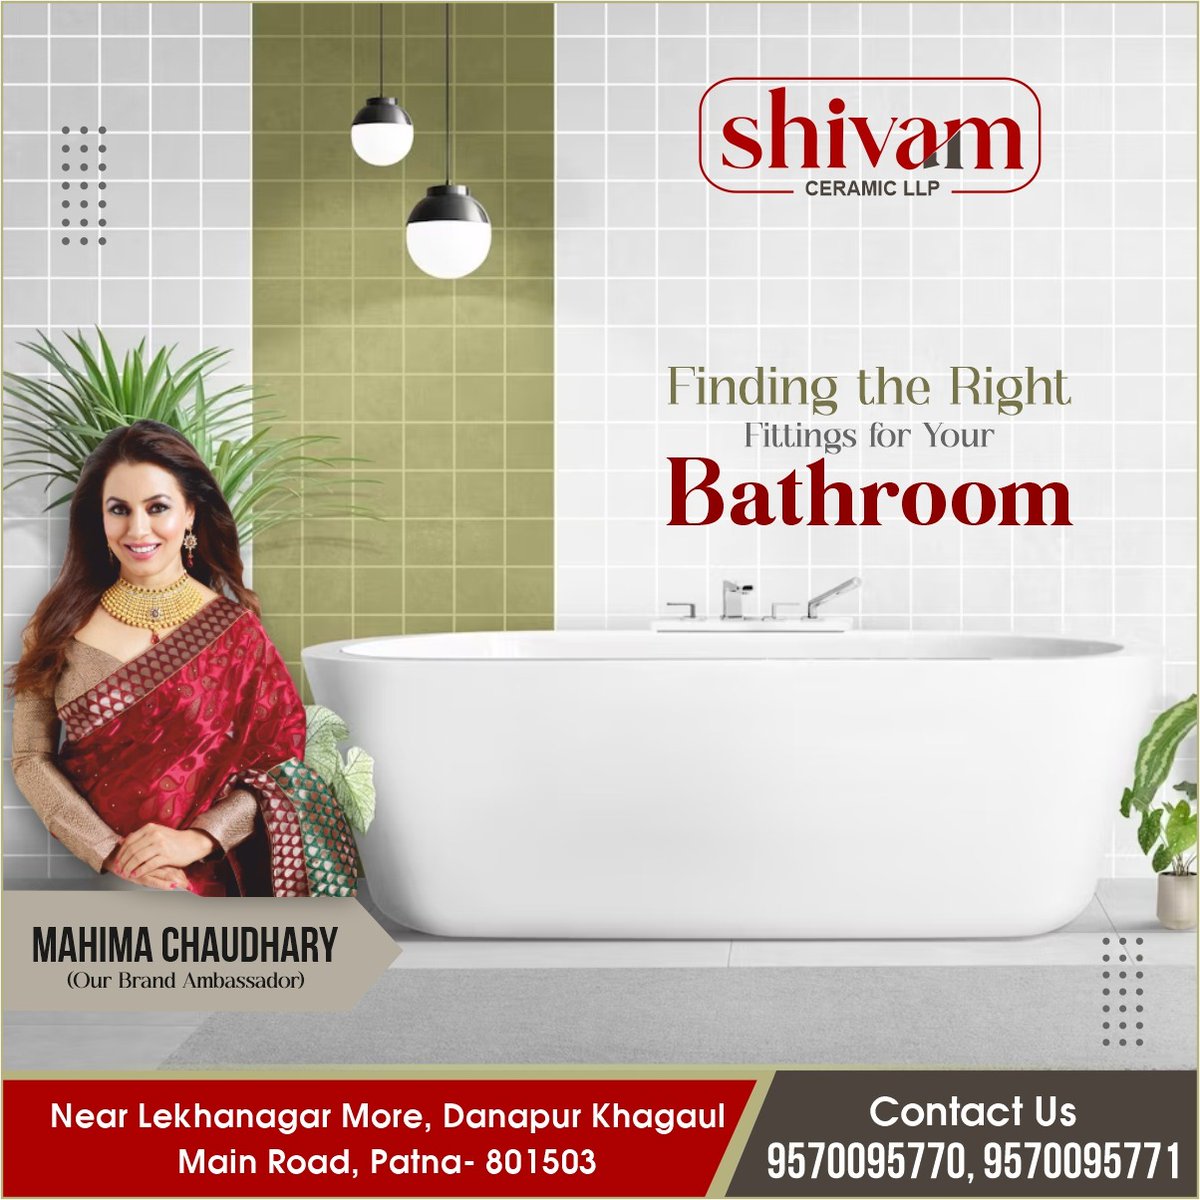 'Upgrade your bathroom with elegance and style! Discover the exquisite range of bath fittings at Shivam Ceramic. From luxurious faucets to sleek showerheads, our collection is designed to transform your bathing experience. 
#ShivamCeramic #TileDesign #InteriorDesign